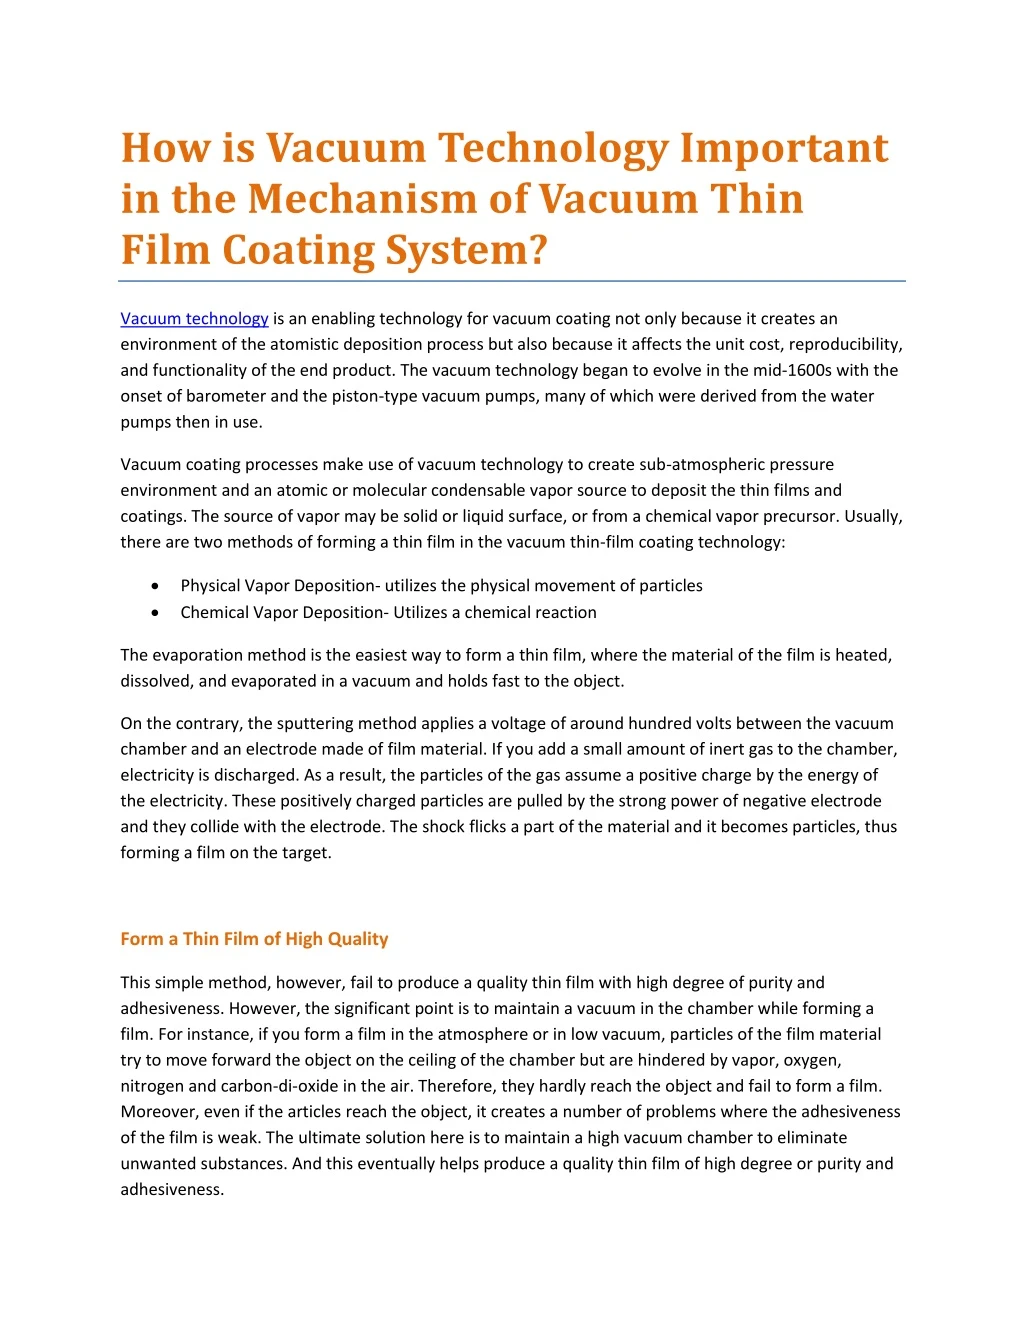 how is vacuum technology important